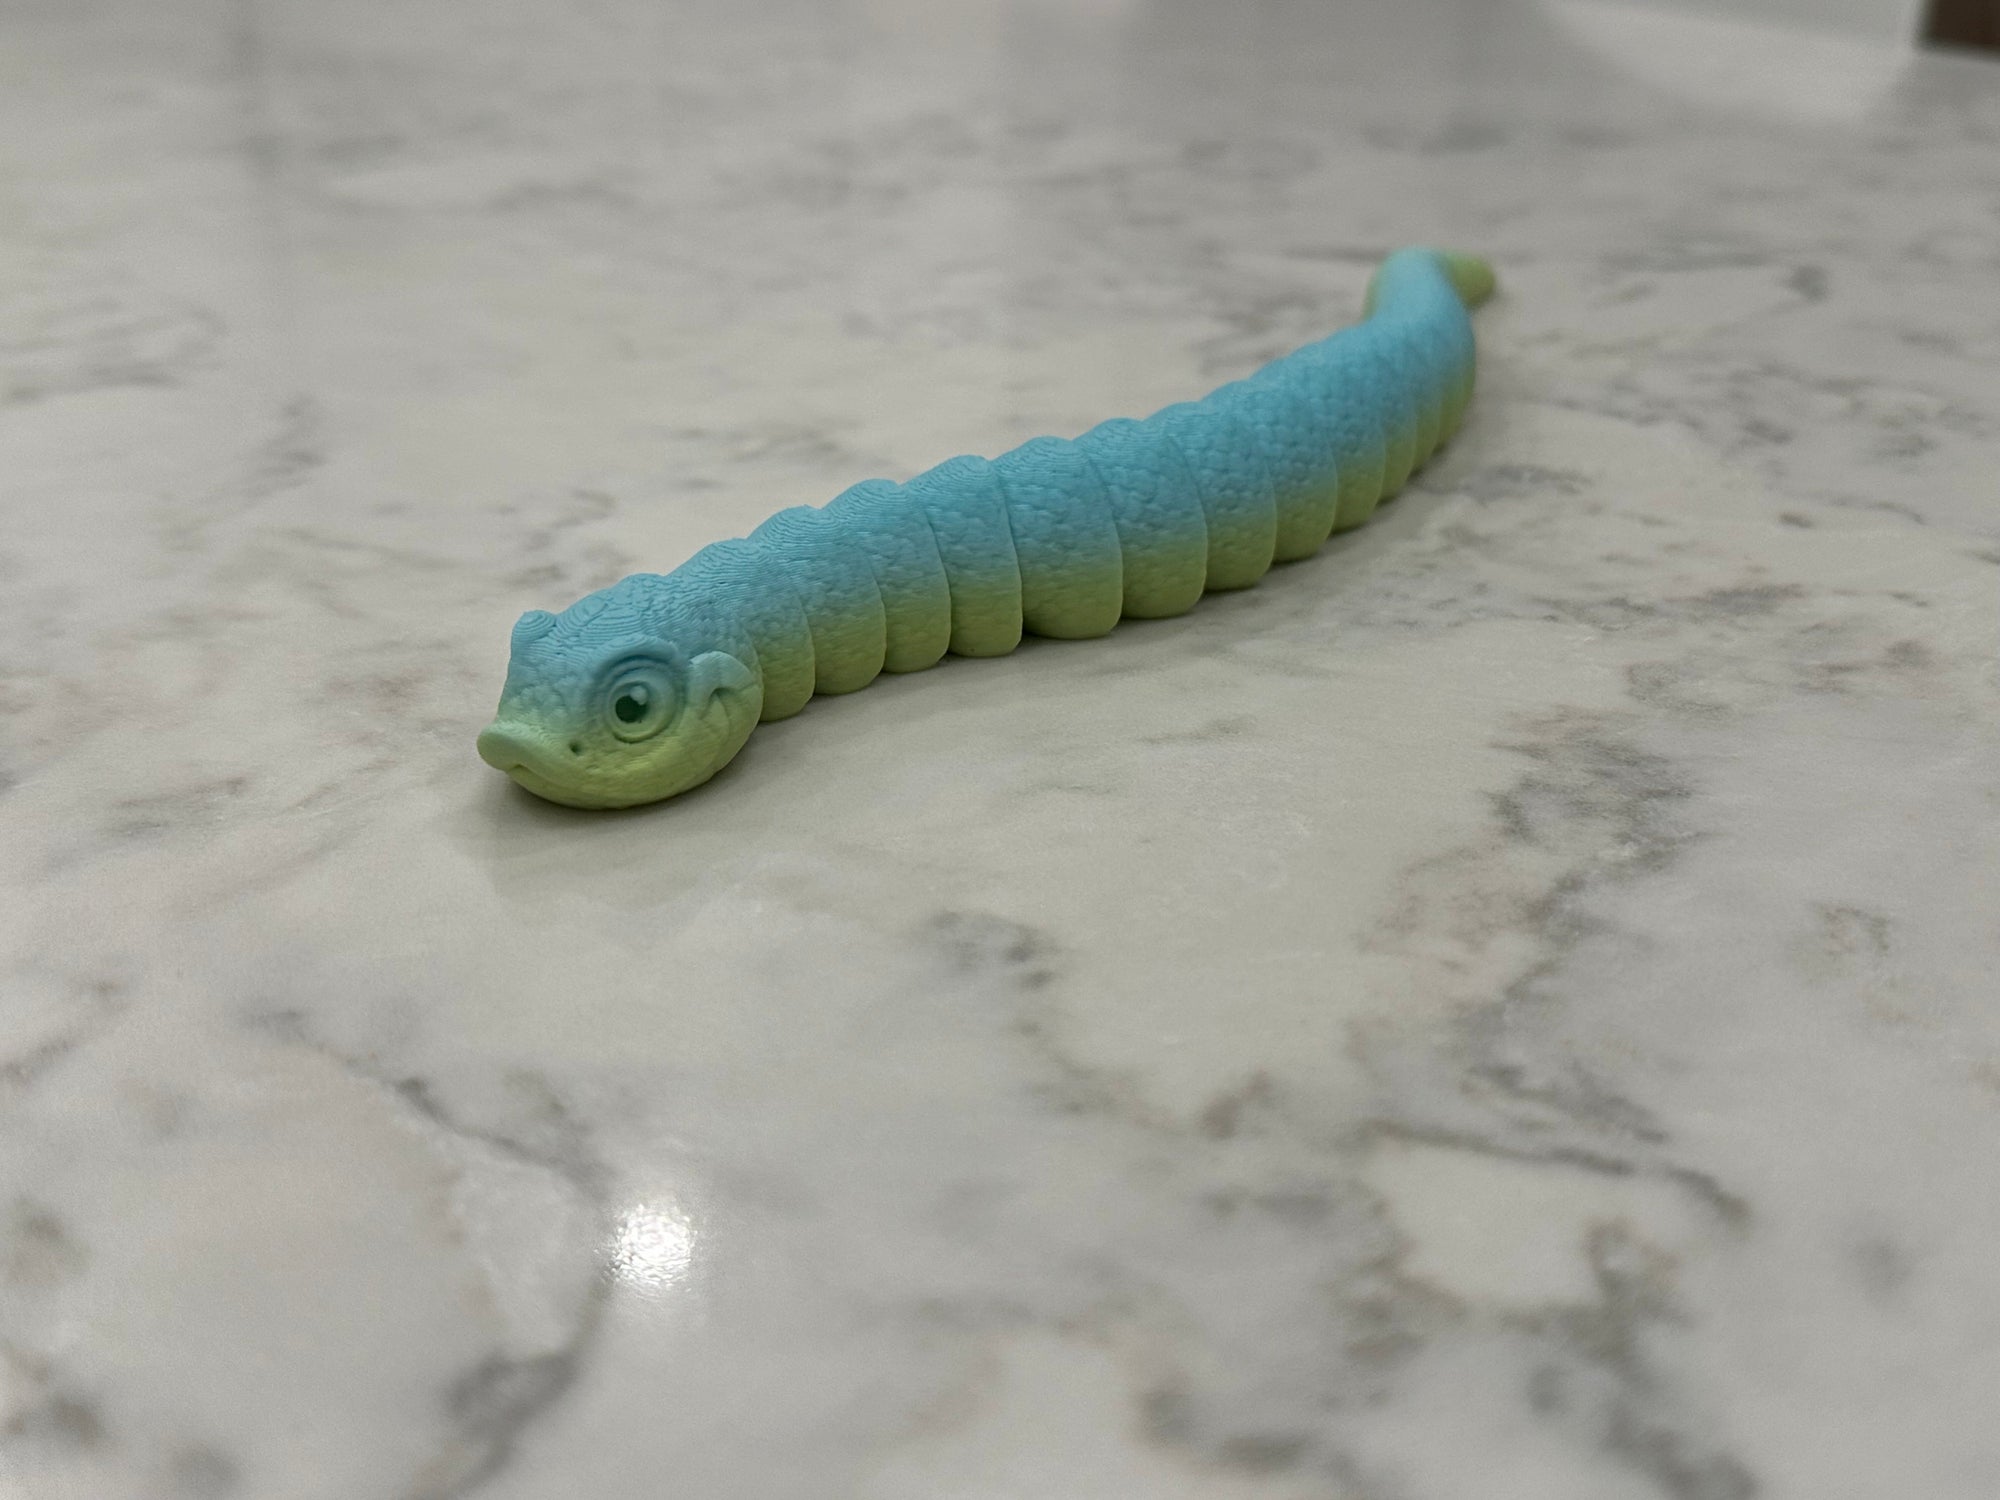 3D Printed Hognose Snake - Articulating, Lifelike Reptile Model - Unique Home Decor - Perfect Gift for Snake Lovers